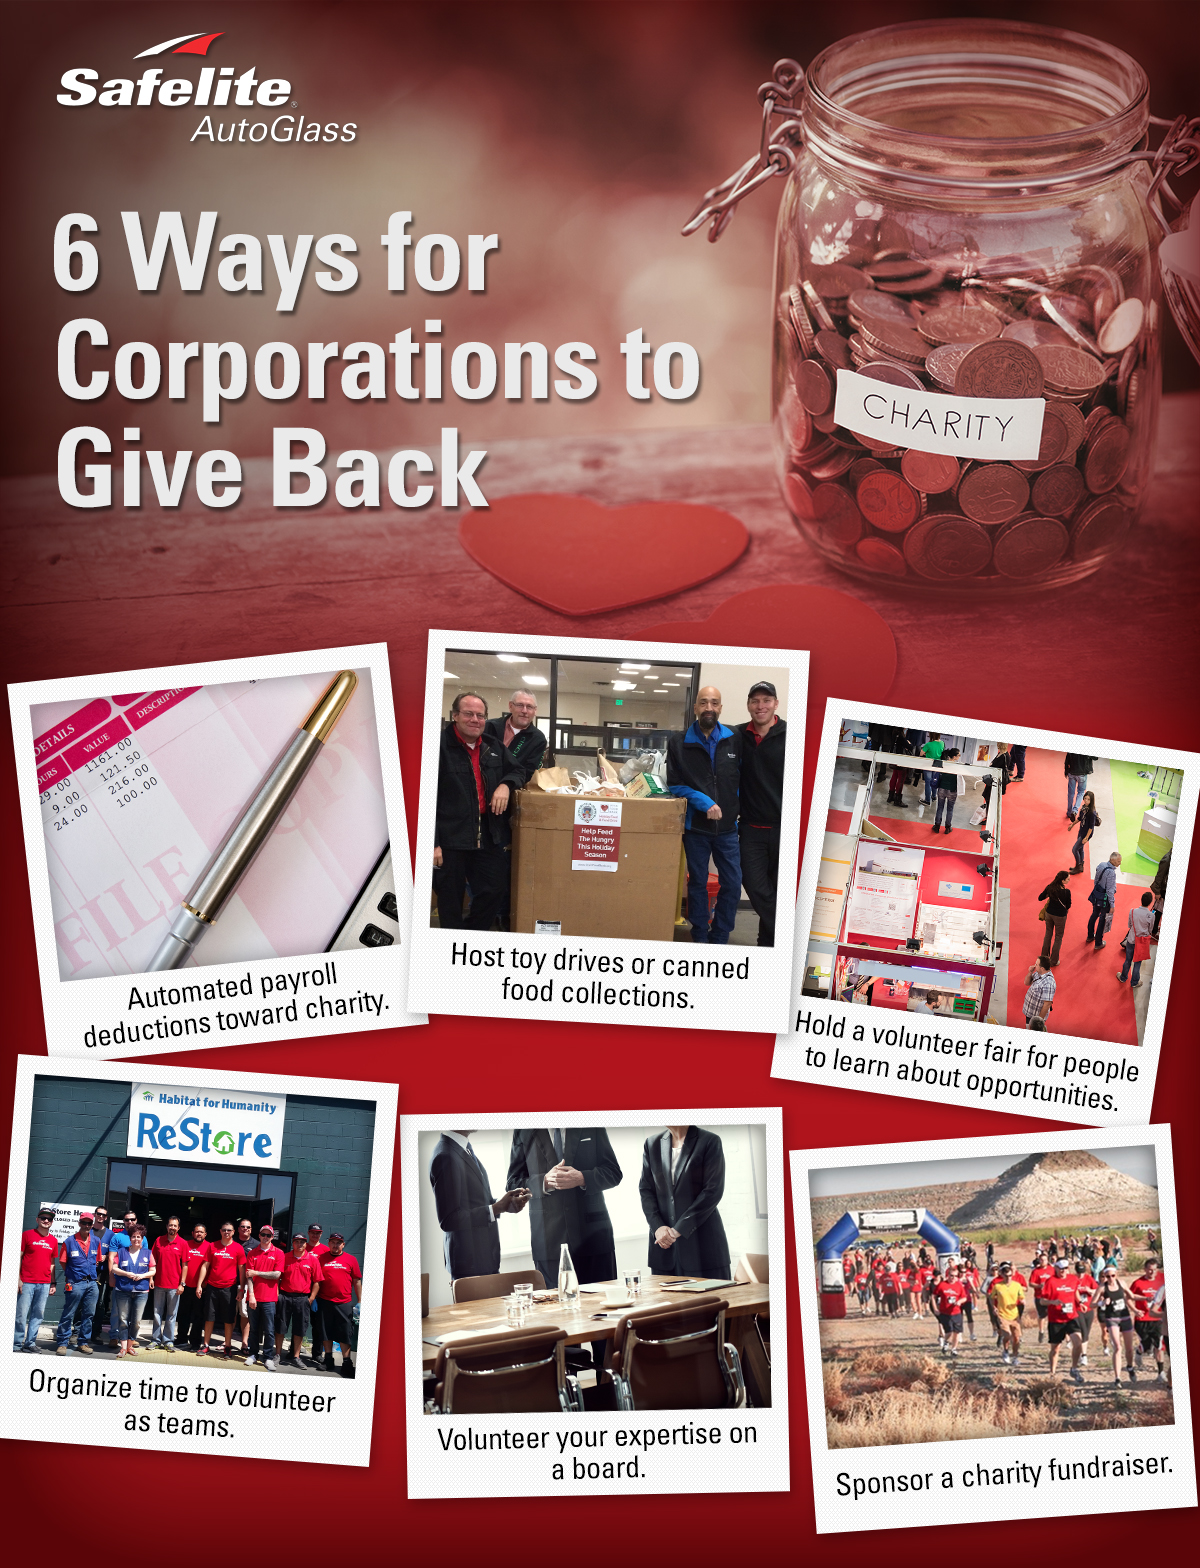 Safelite AutoGlass shares an infographic and tips about six ways corporations can give back.